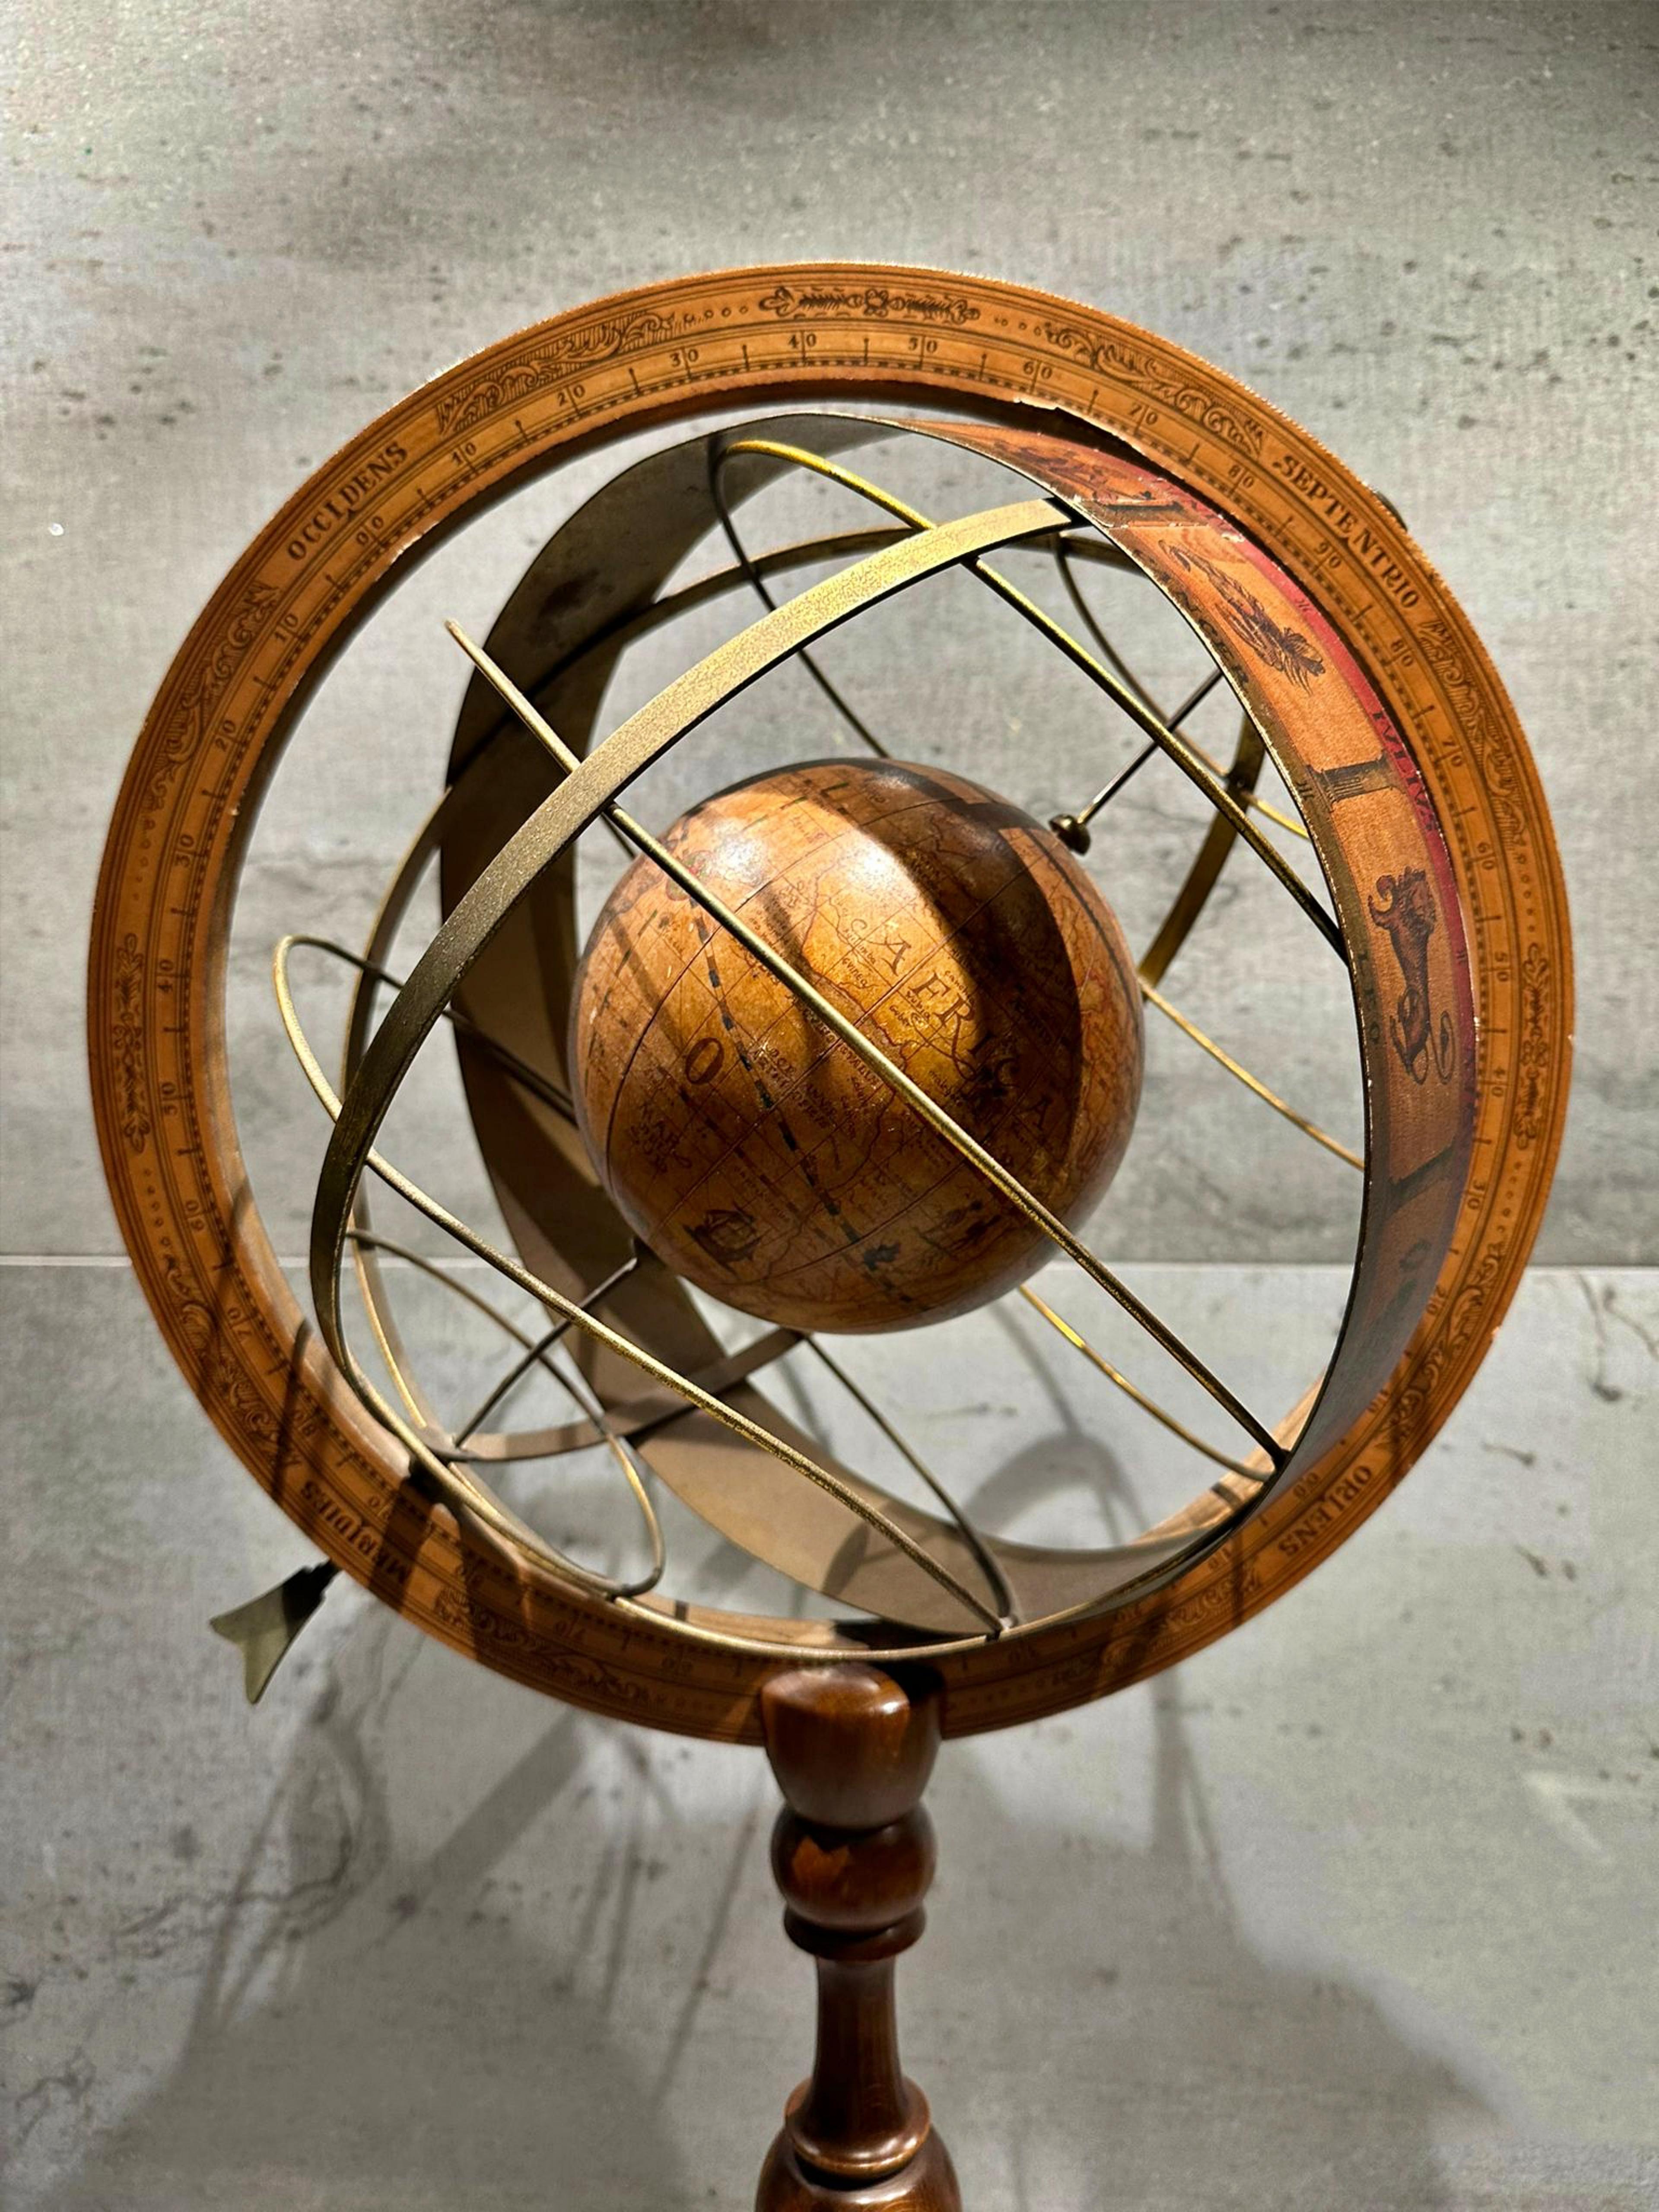 Important and Exclusive Spanish Terrestrial Globe 20th century
of the zodiac made of metal on a solid hardwood base. A unique highly decorative collector's item for any room in the house. 
Measurements: 58 cm high and 42 cm in diameter.
very good